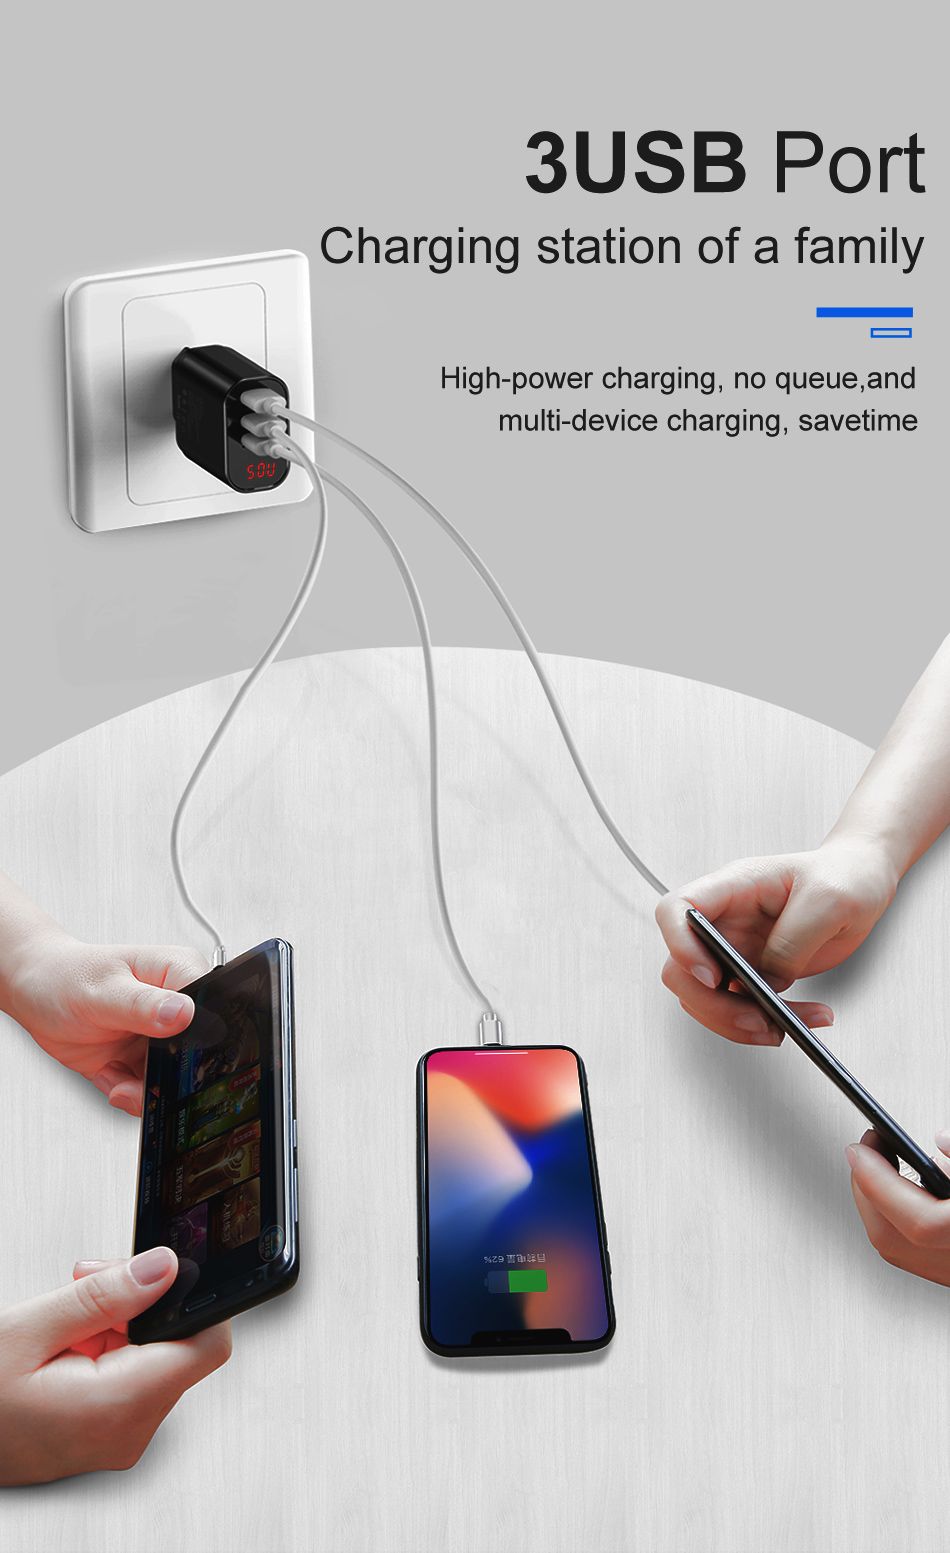 Baseus-Digital-LED-Display-34A-3-USB-Port-Fast-Charging-Wall-Travel-Charger-for-iPhone-X-1310504